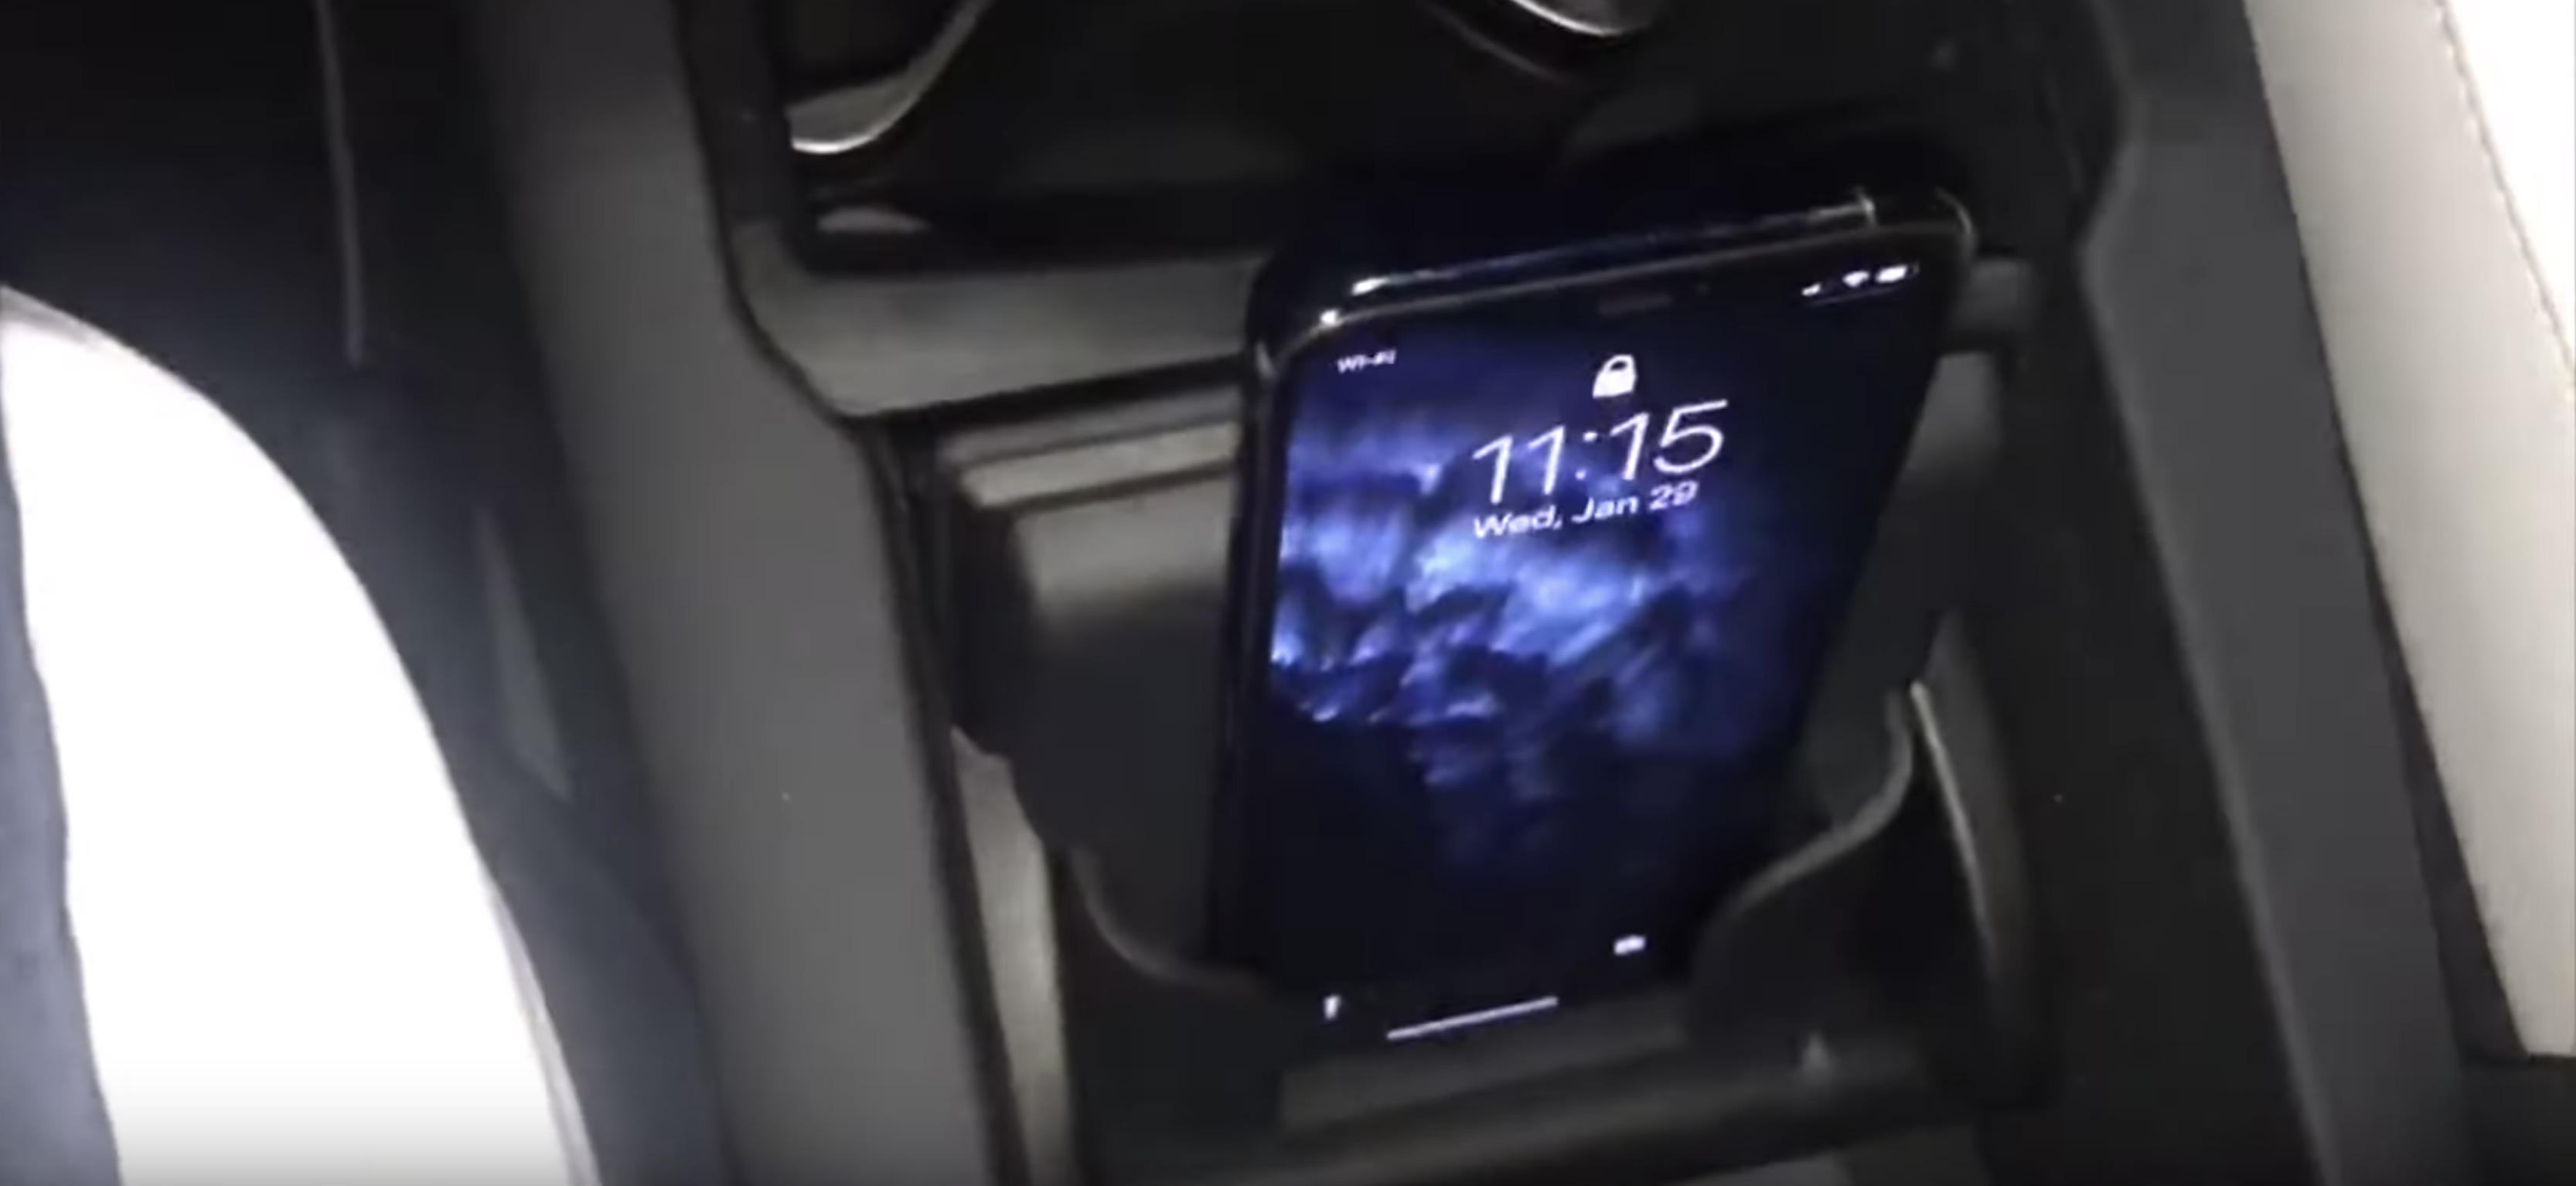 First Look At Tesla S New Model S And Model X Wireless Phone